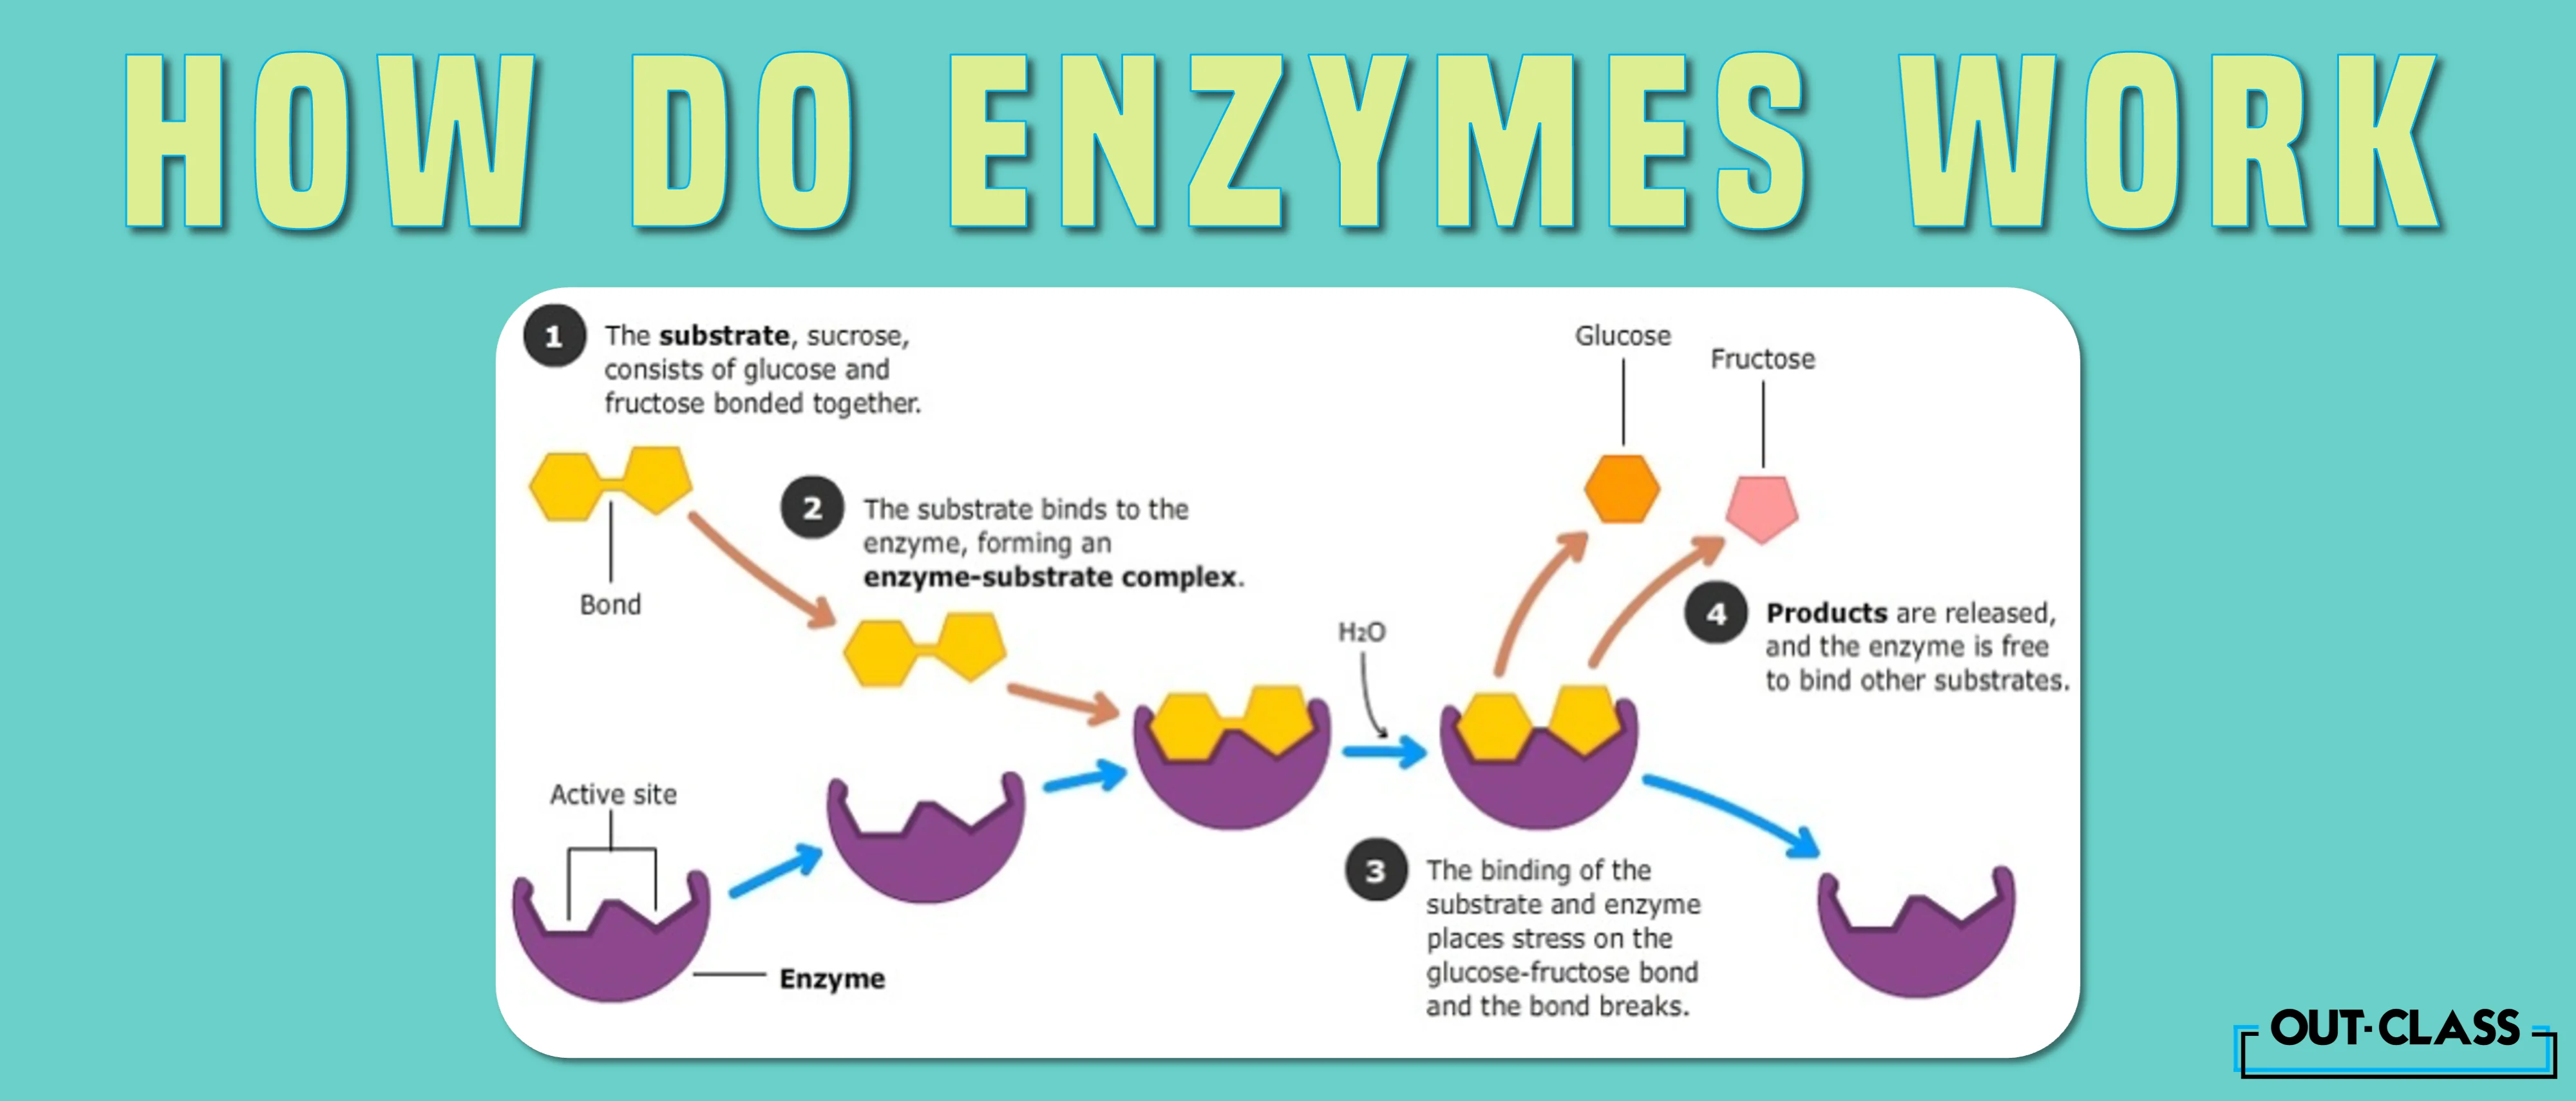 it shows how do enzymes work